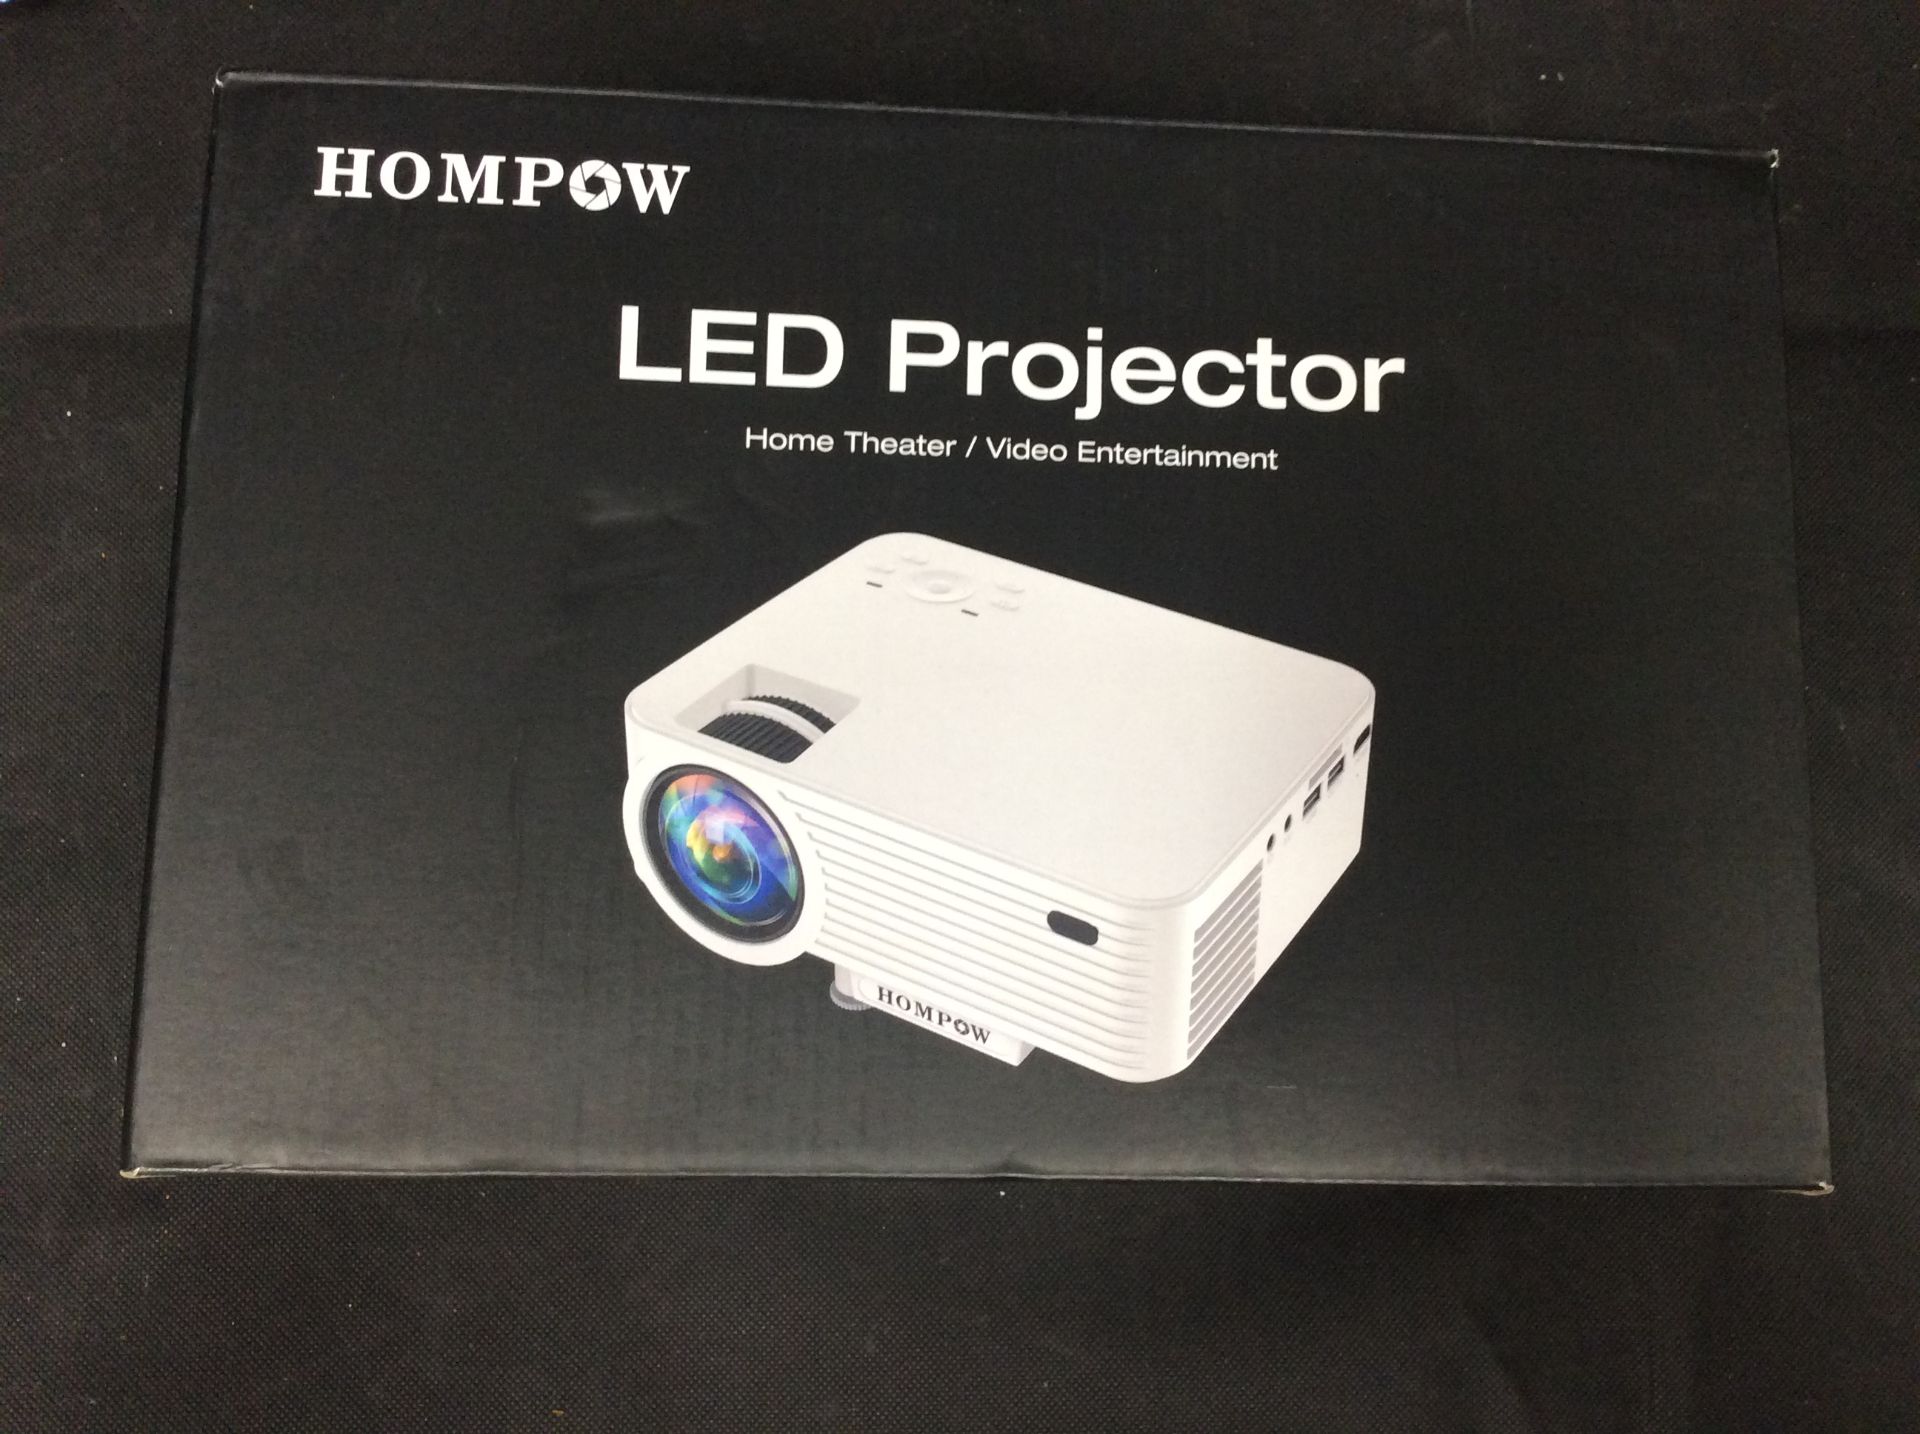 Hopemow LED Projector